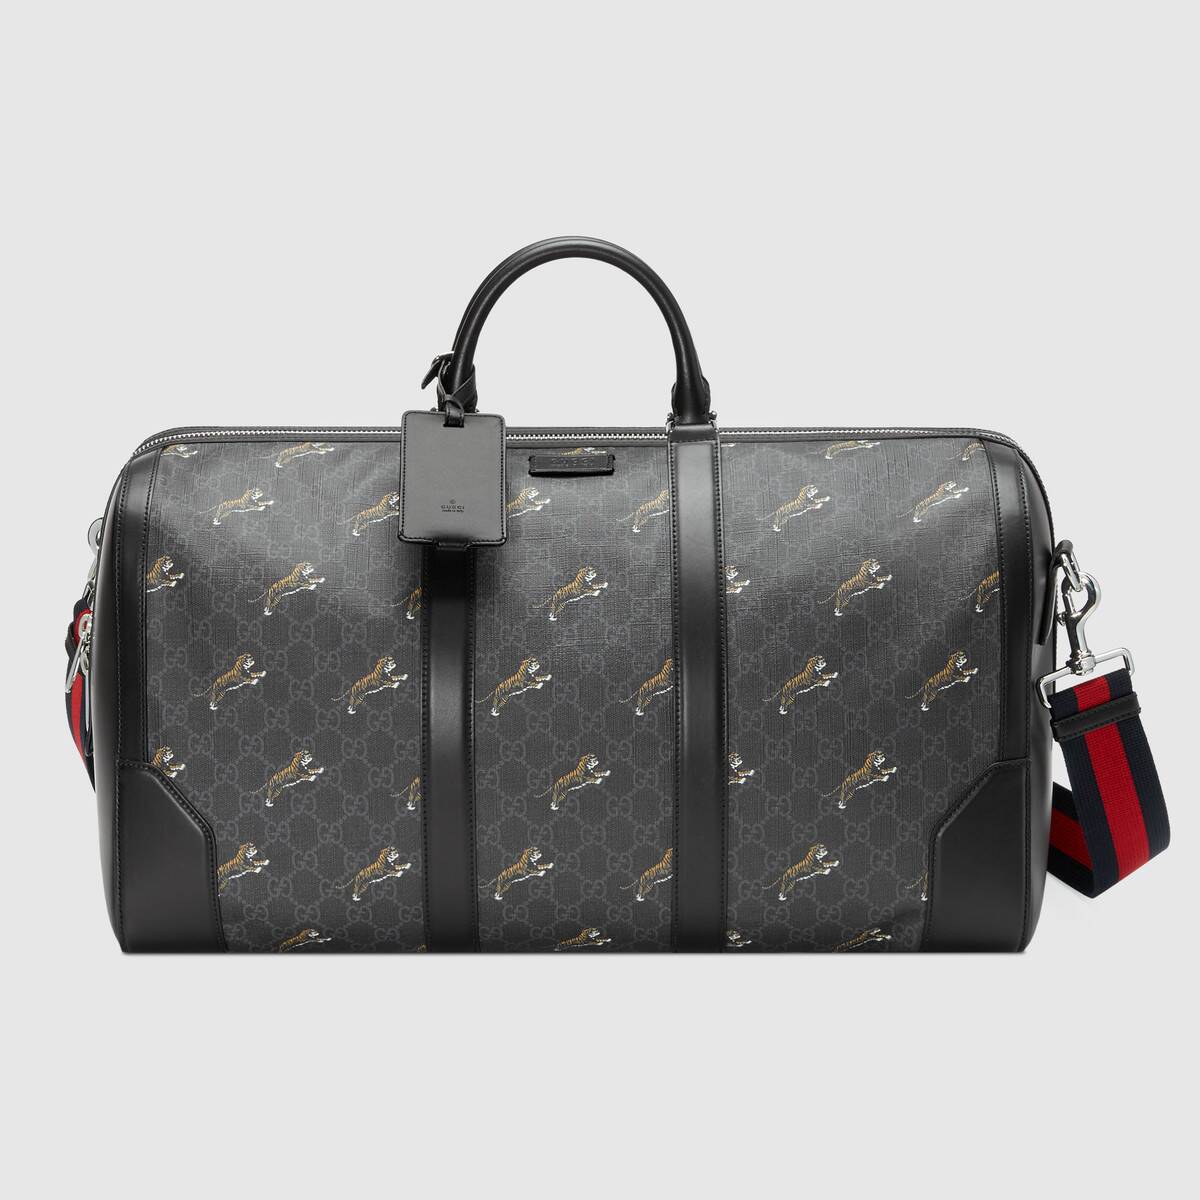 Gucci Bestiary carry-on duffle with tigers